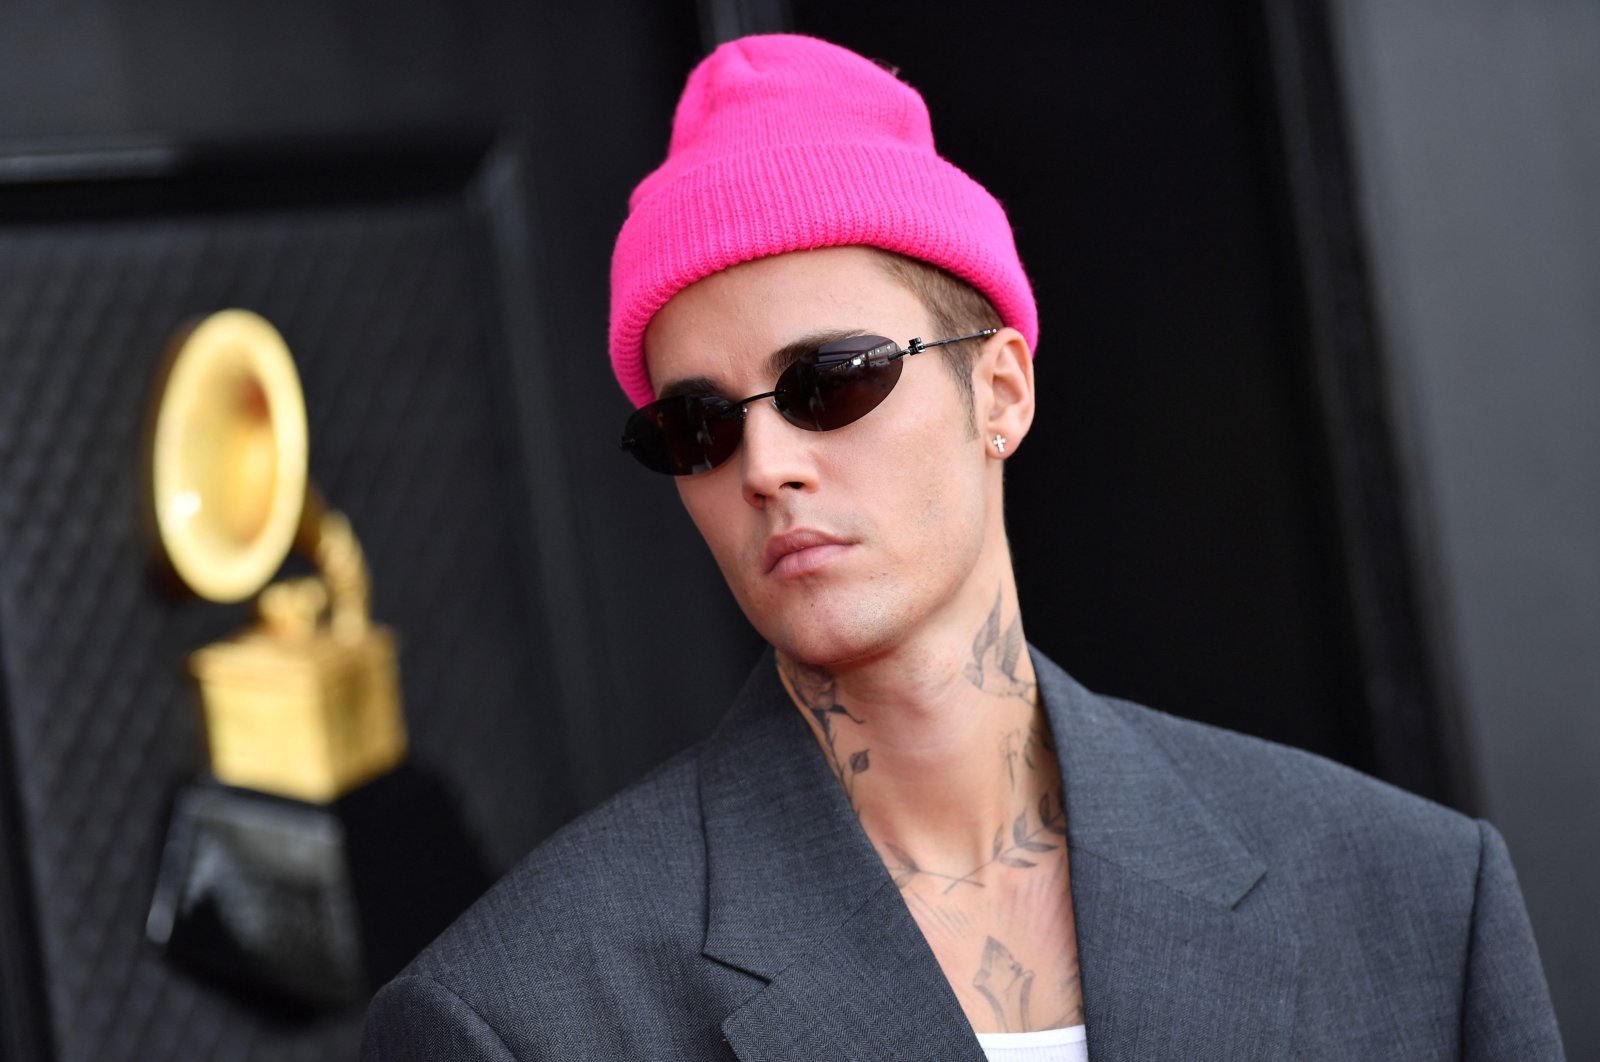 In this file photo taken on Apr. 3, 2022 Canadian singer-songwriter Justin Bieber arrives for the 64th Annual Grammy Awards at the MGM Grand Garden Arena in Las Vegas. (AFP)